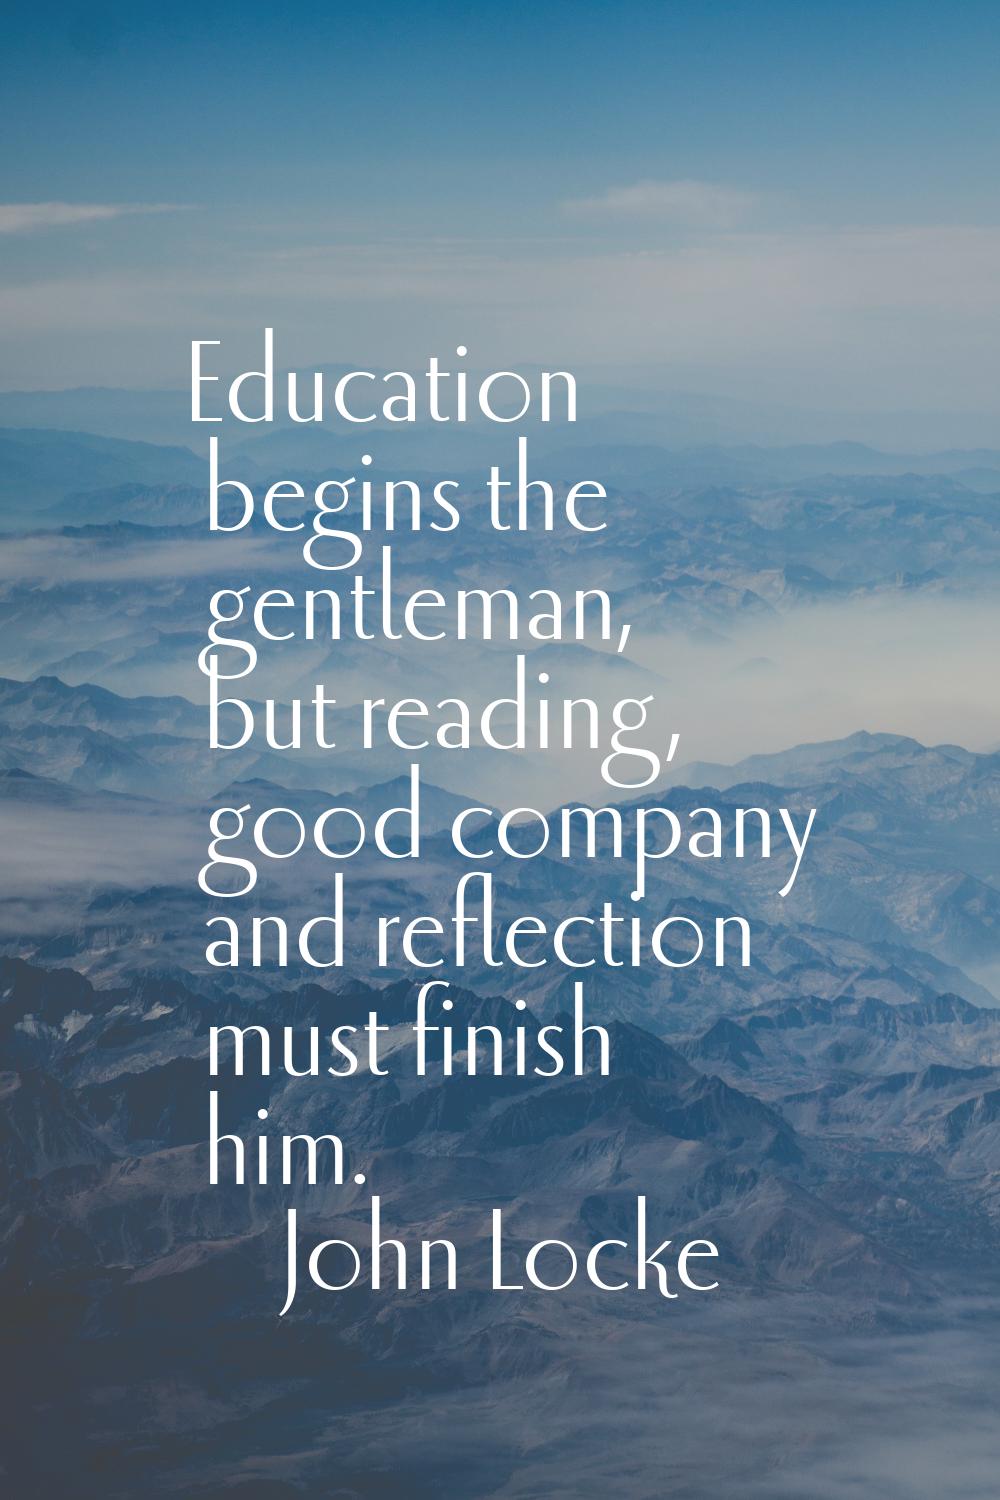 Education begins the gentleman, but reading, good company and reflection must finish him.